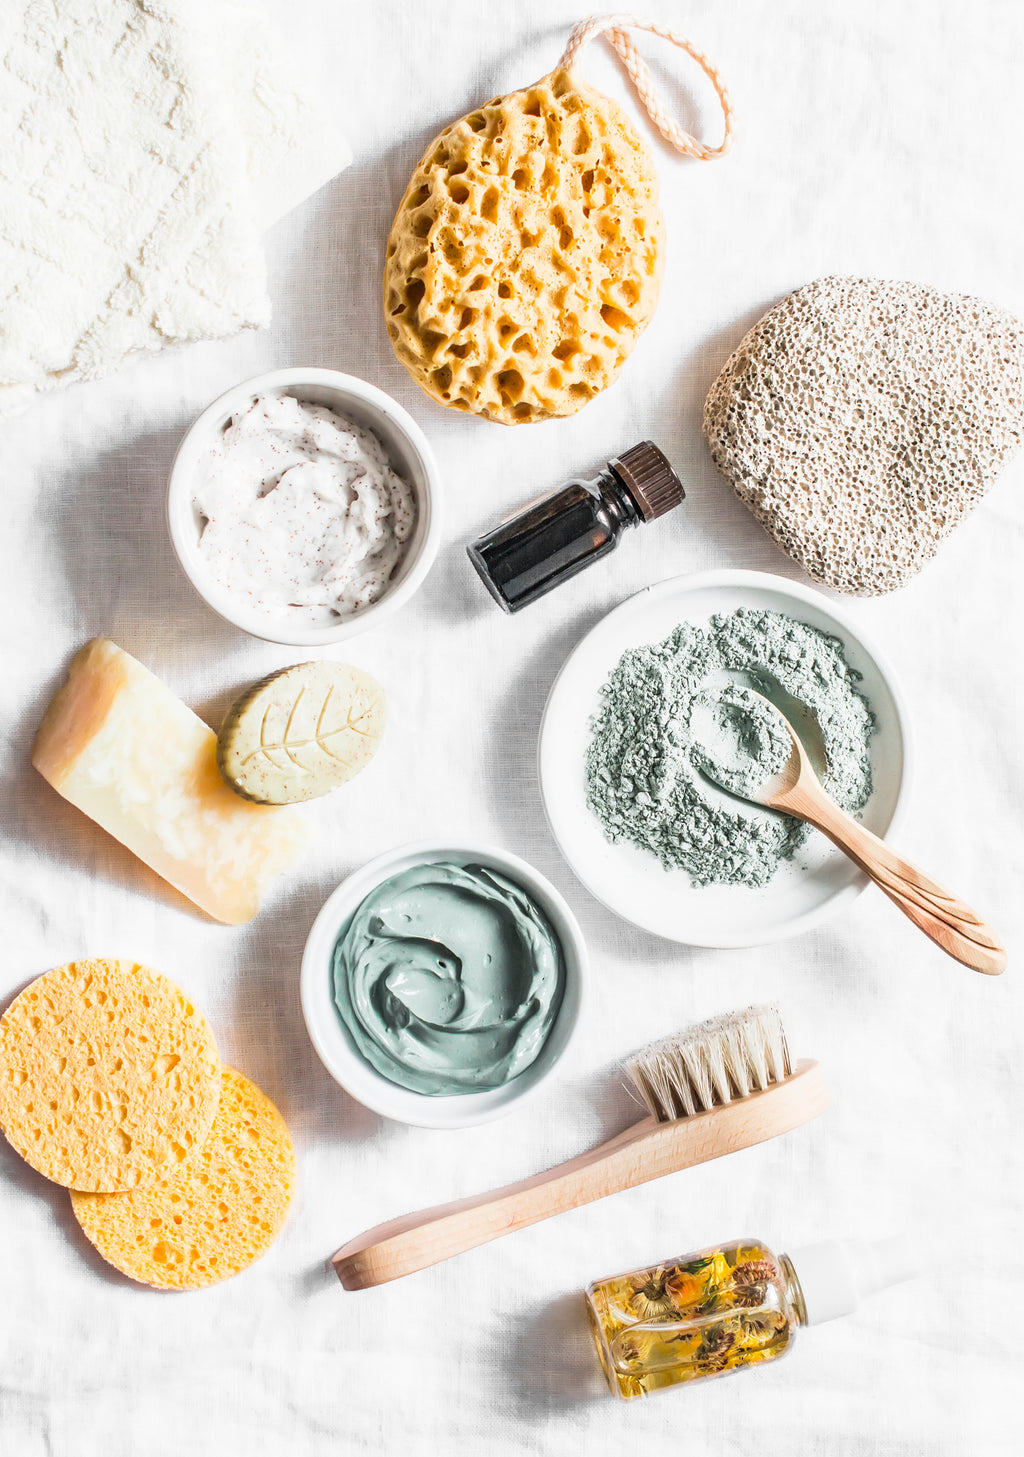 SEO: Spa accessories - nut scrub, sponge, facial brush, natural soap, clay face mask, pumice stone, essential oil on a light background, top view. Healthy lifestyle concept. Beauty, skin care. flat lay stock photo Beauty, Make-Up, Clean, Spa, Skin Care